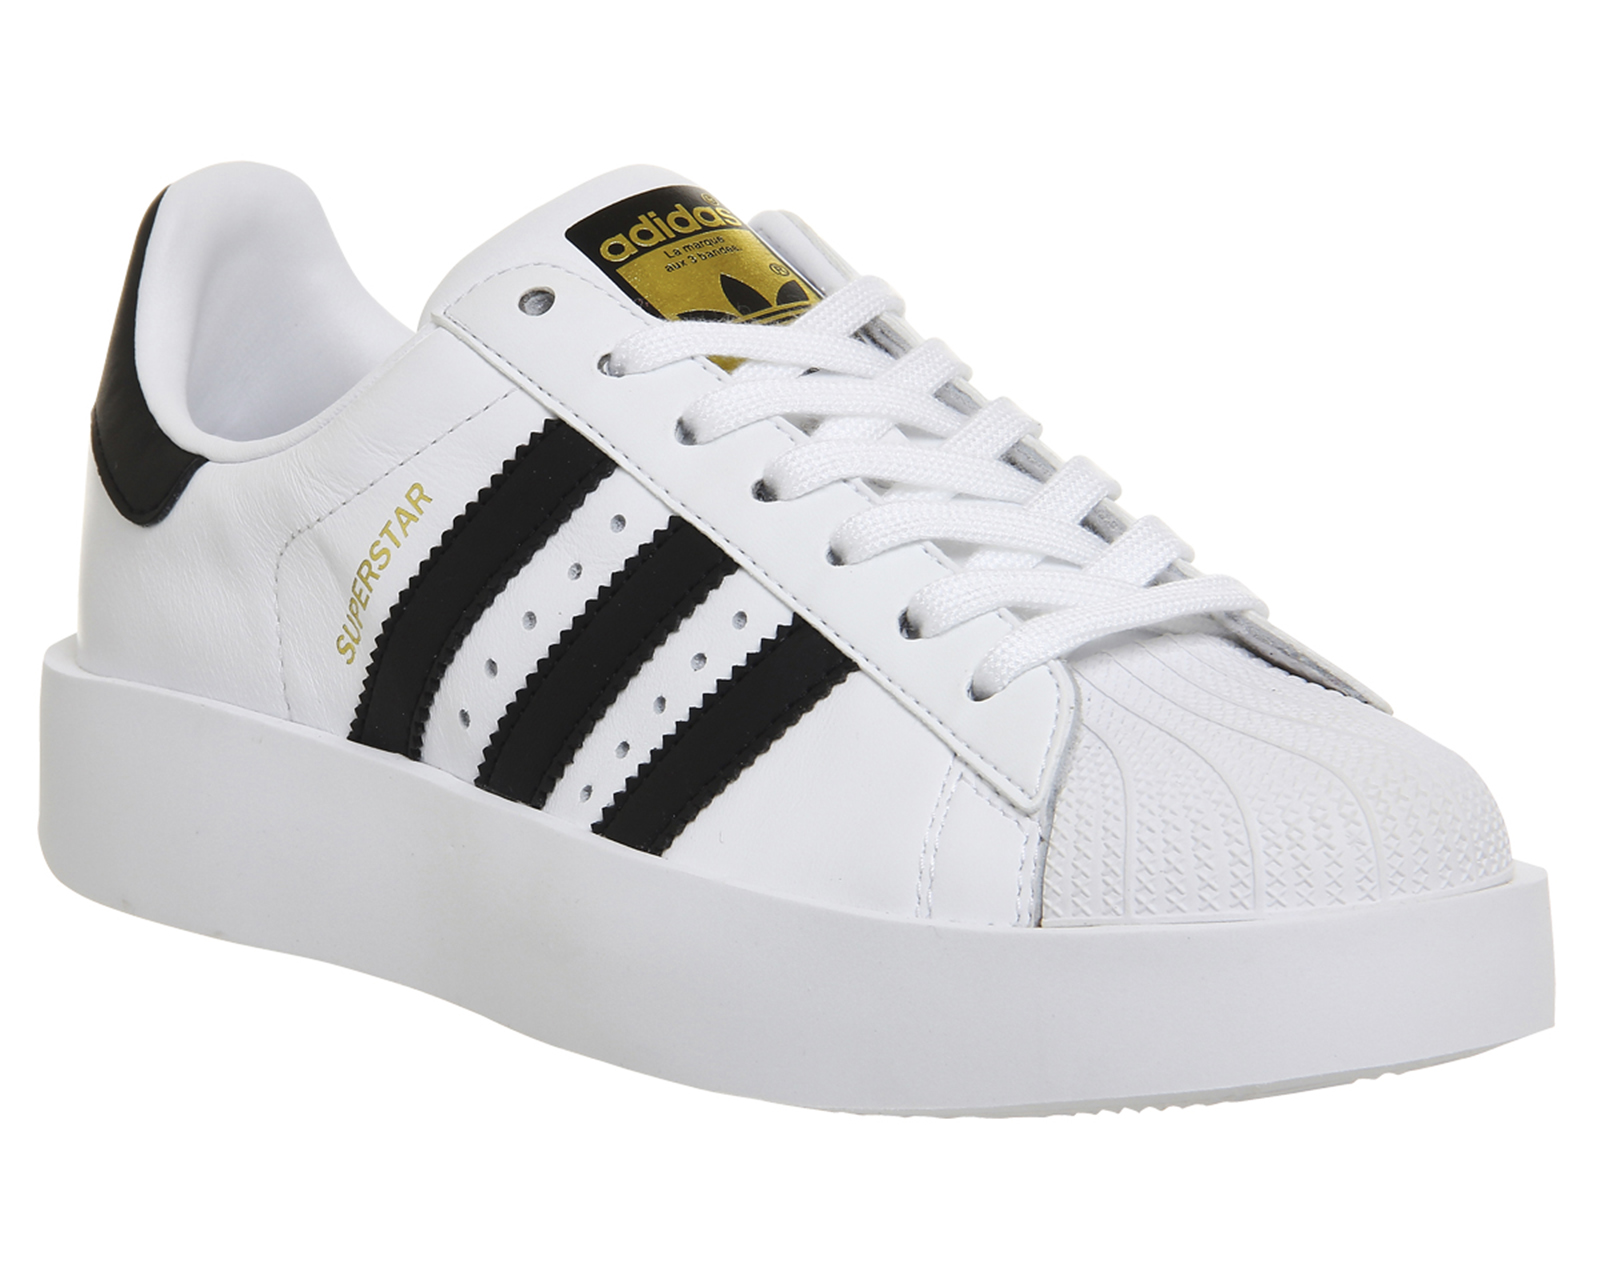 adidas Superstar Bold White Black - Hers trainers